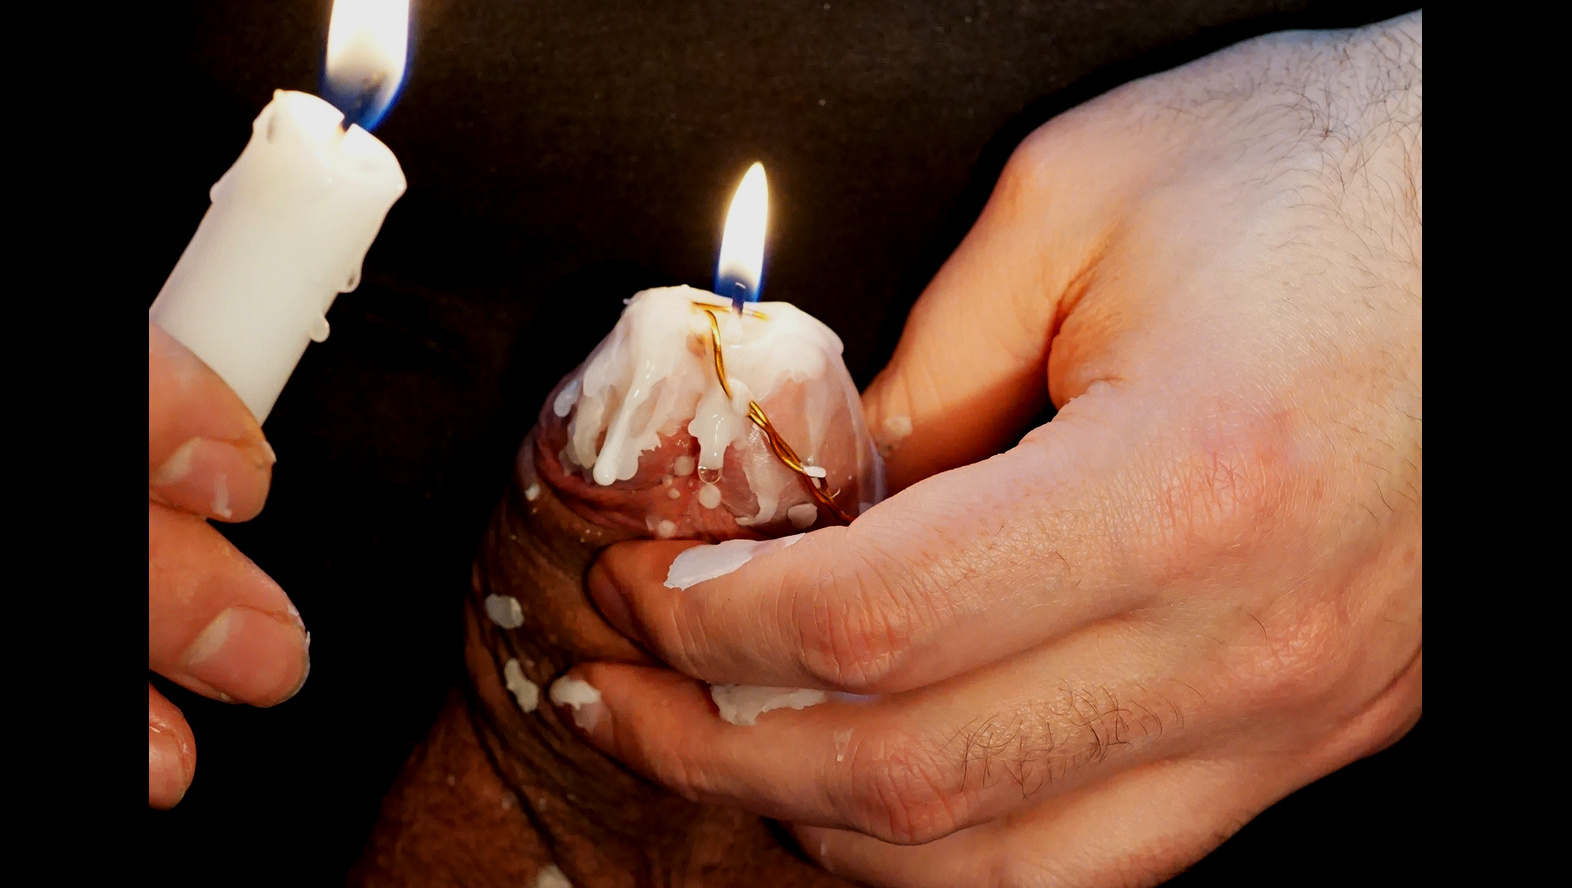 cock candle burning CBT, pouring wax in urethra making